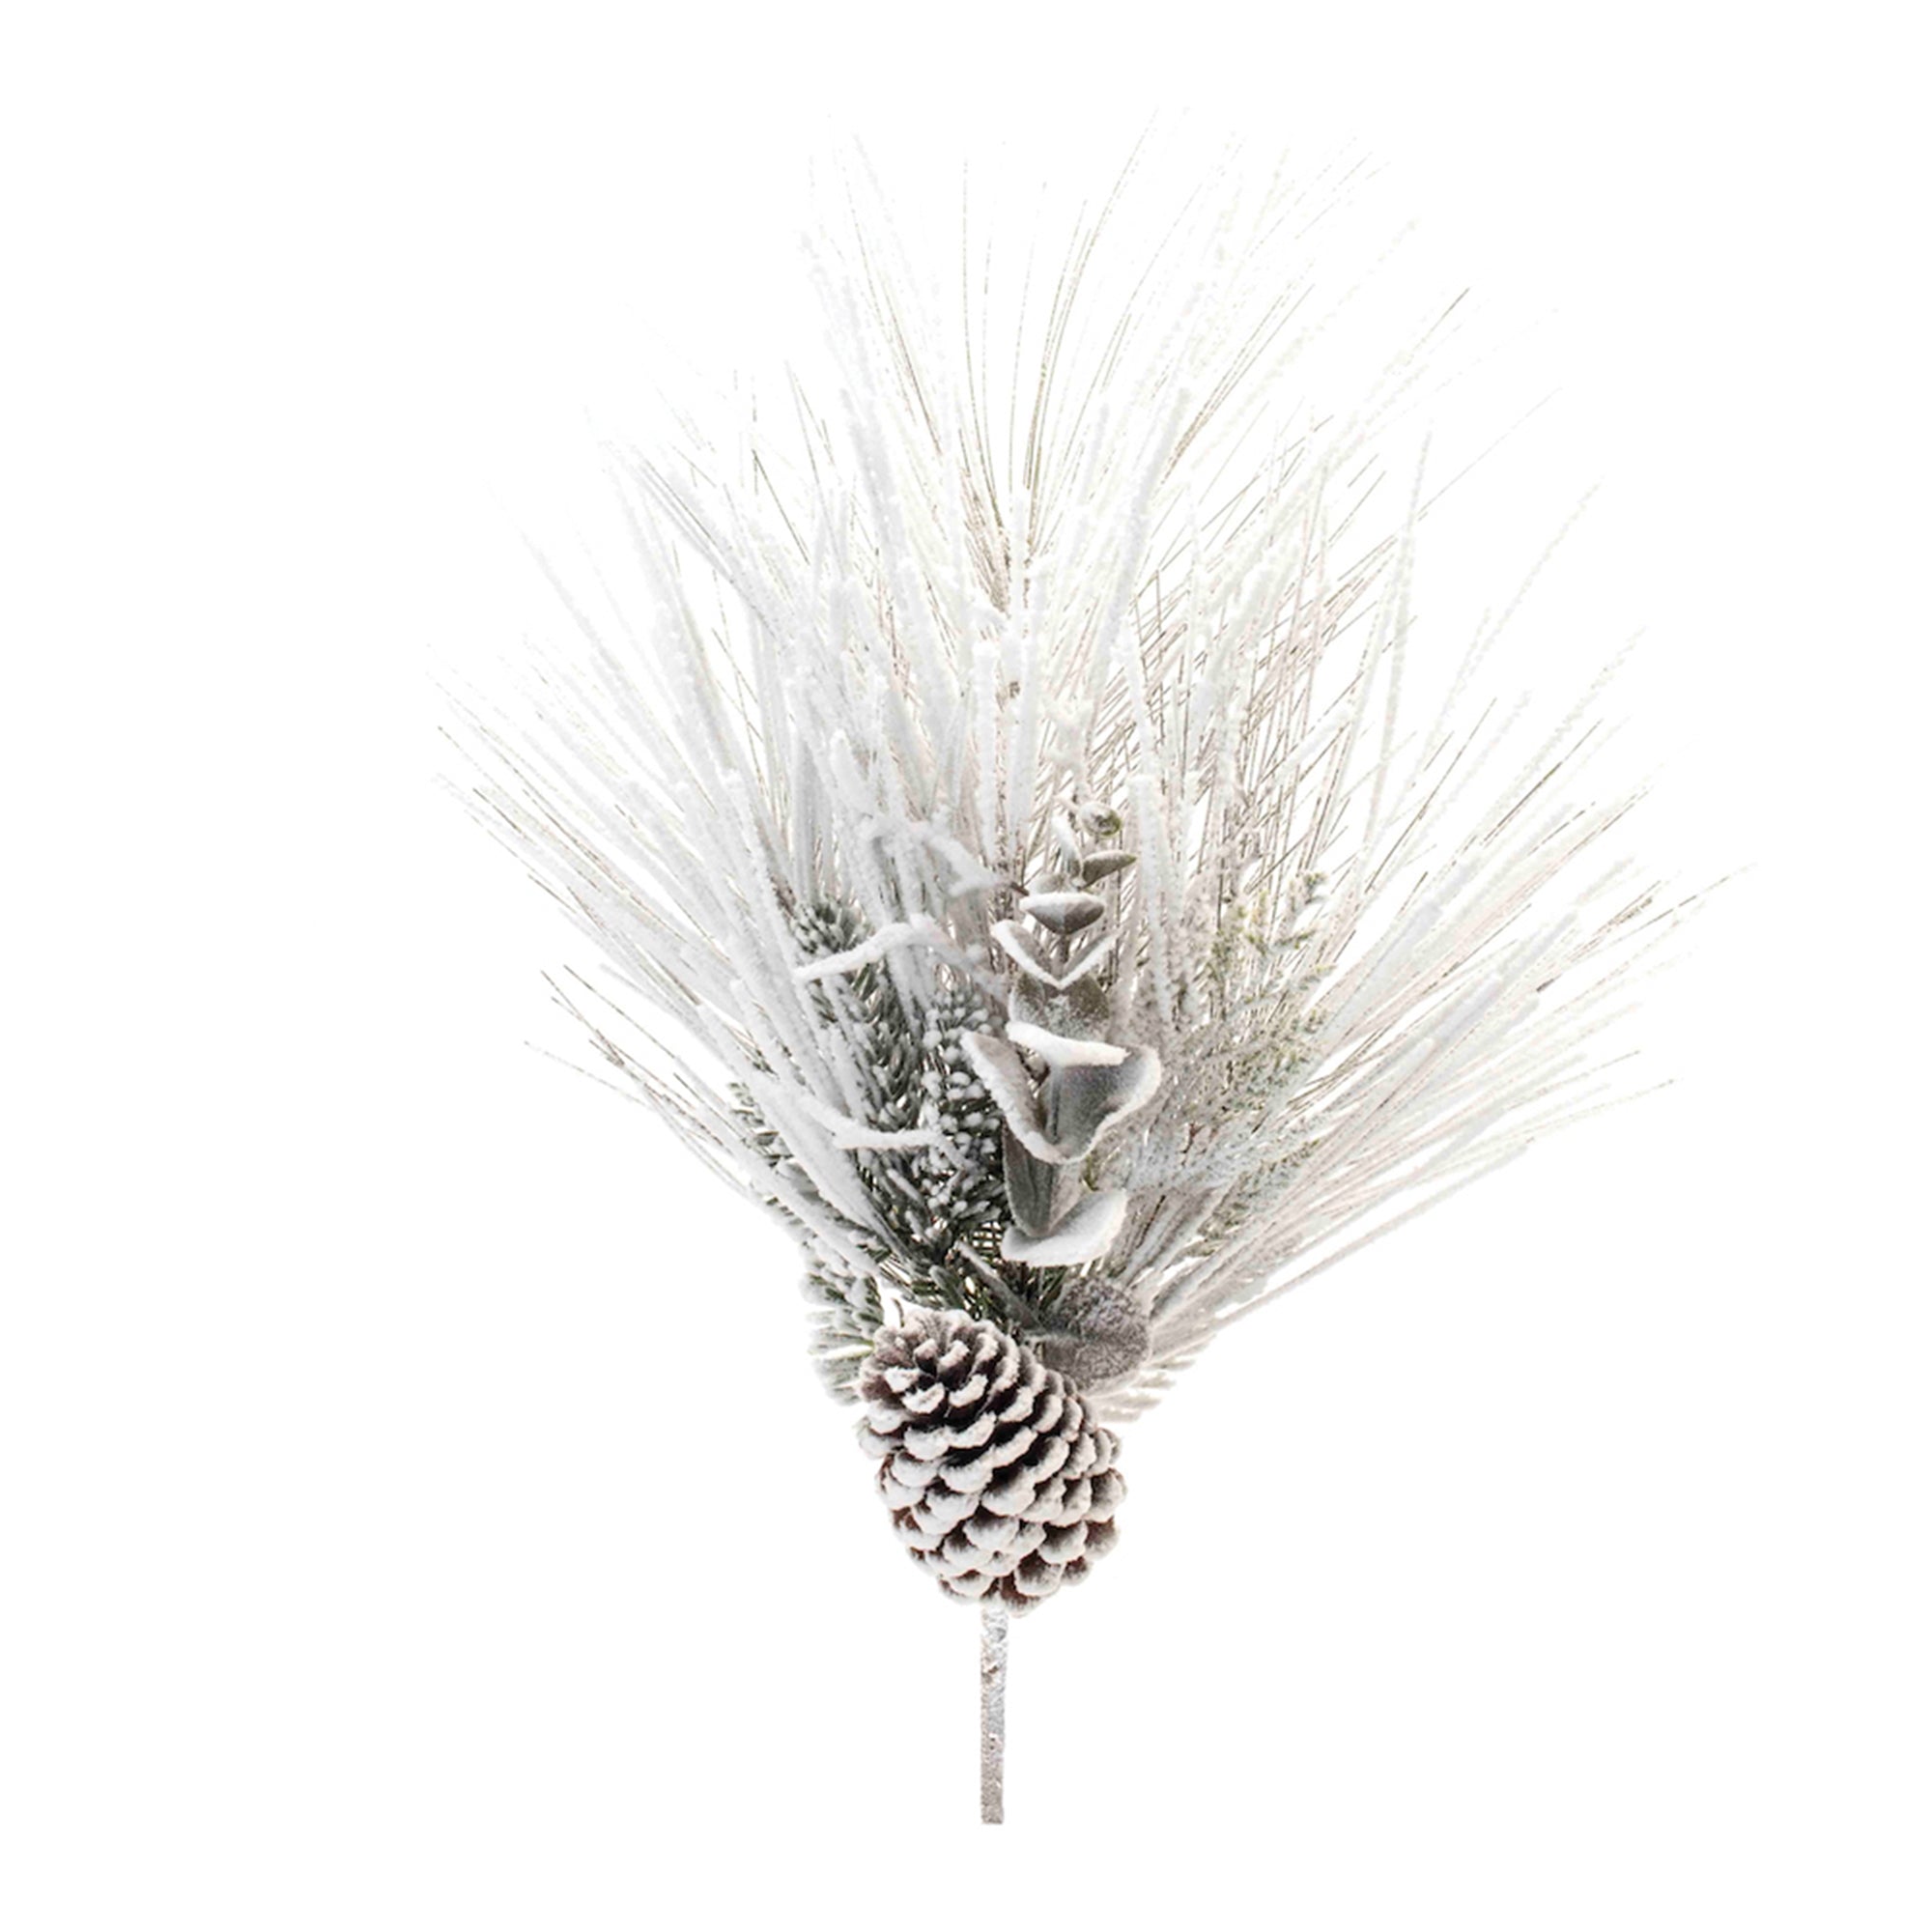 Flocked Mixed Long Needle Pine Spray with Pinecone (Set of 2)